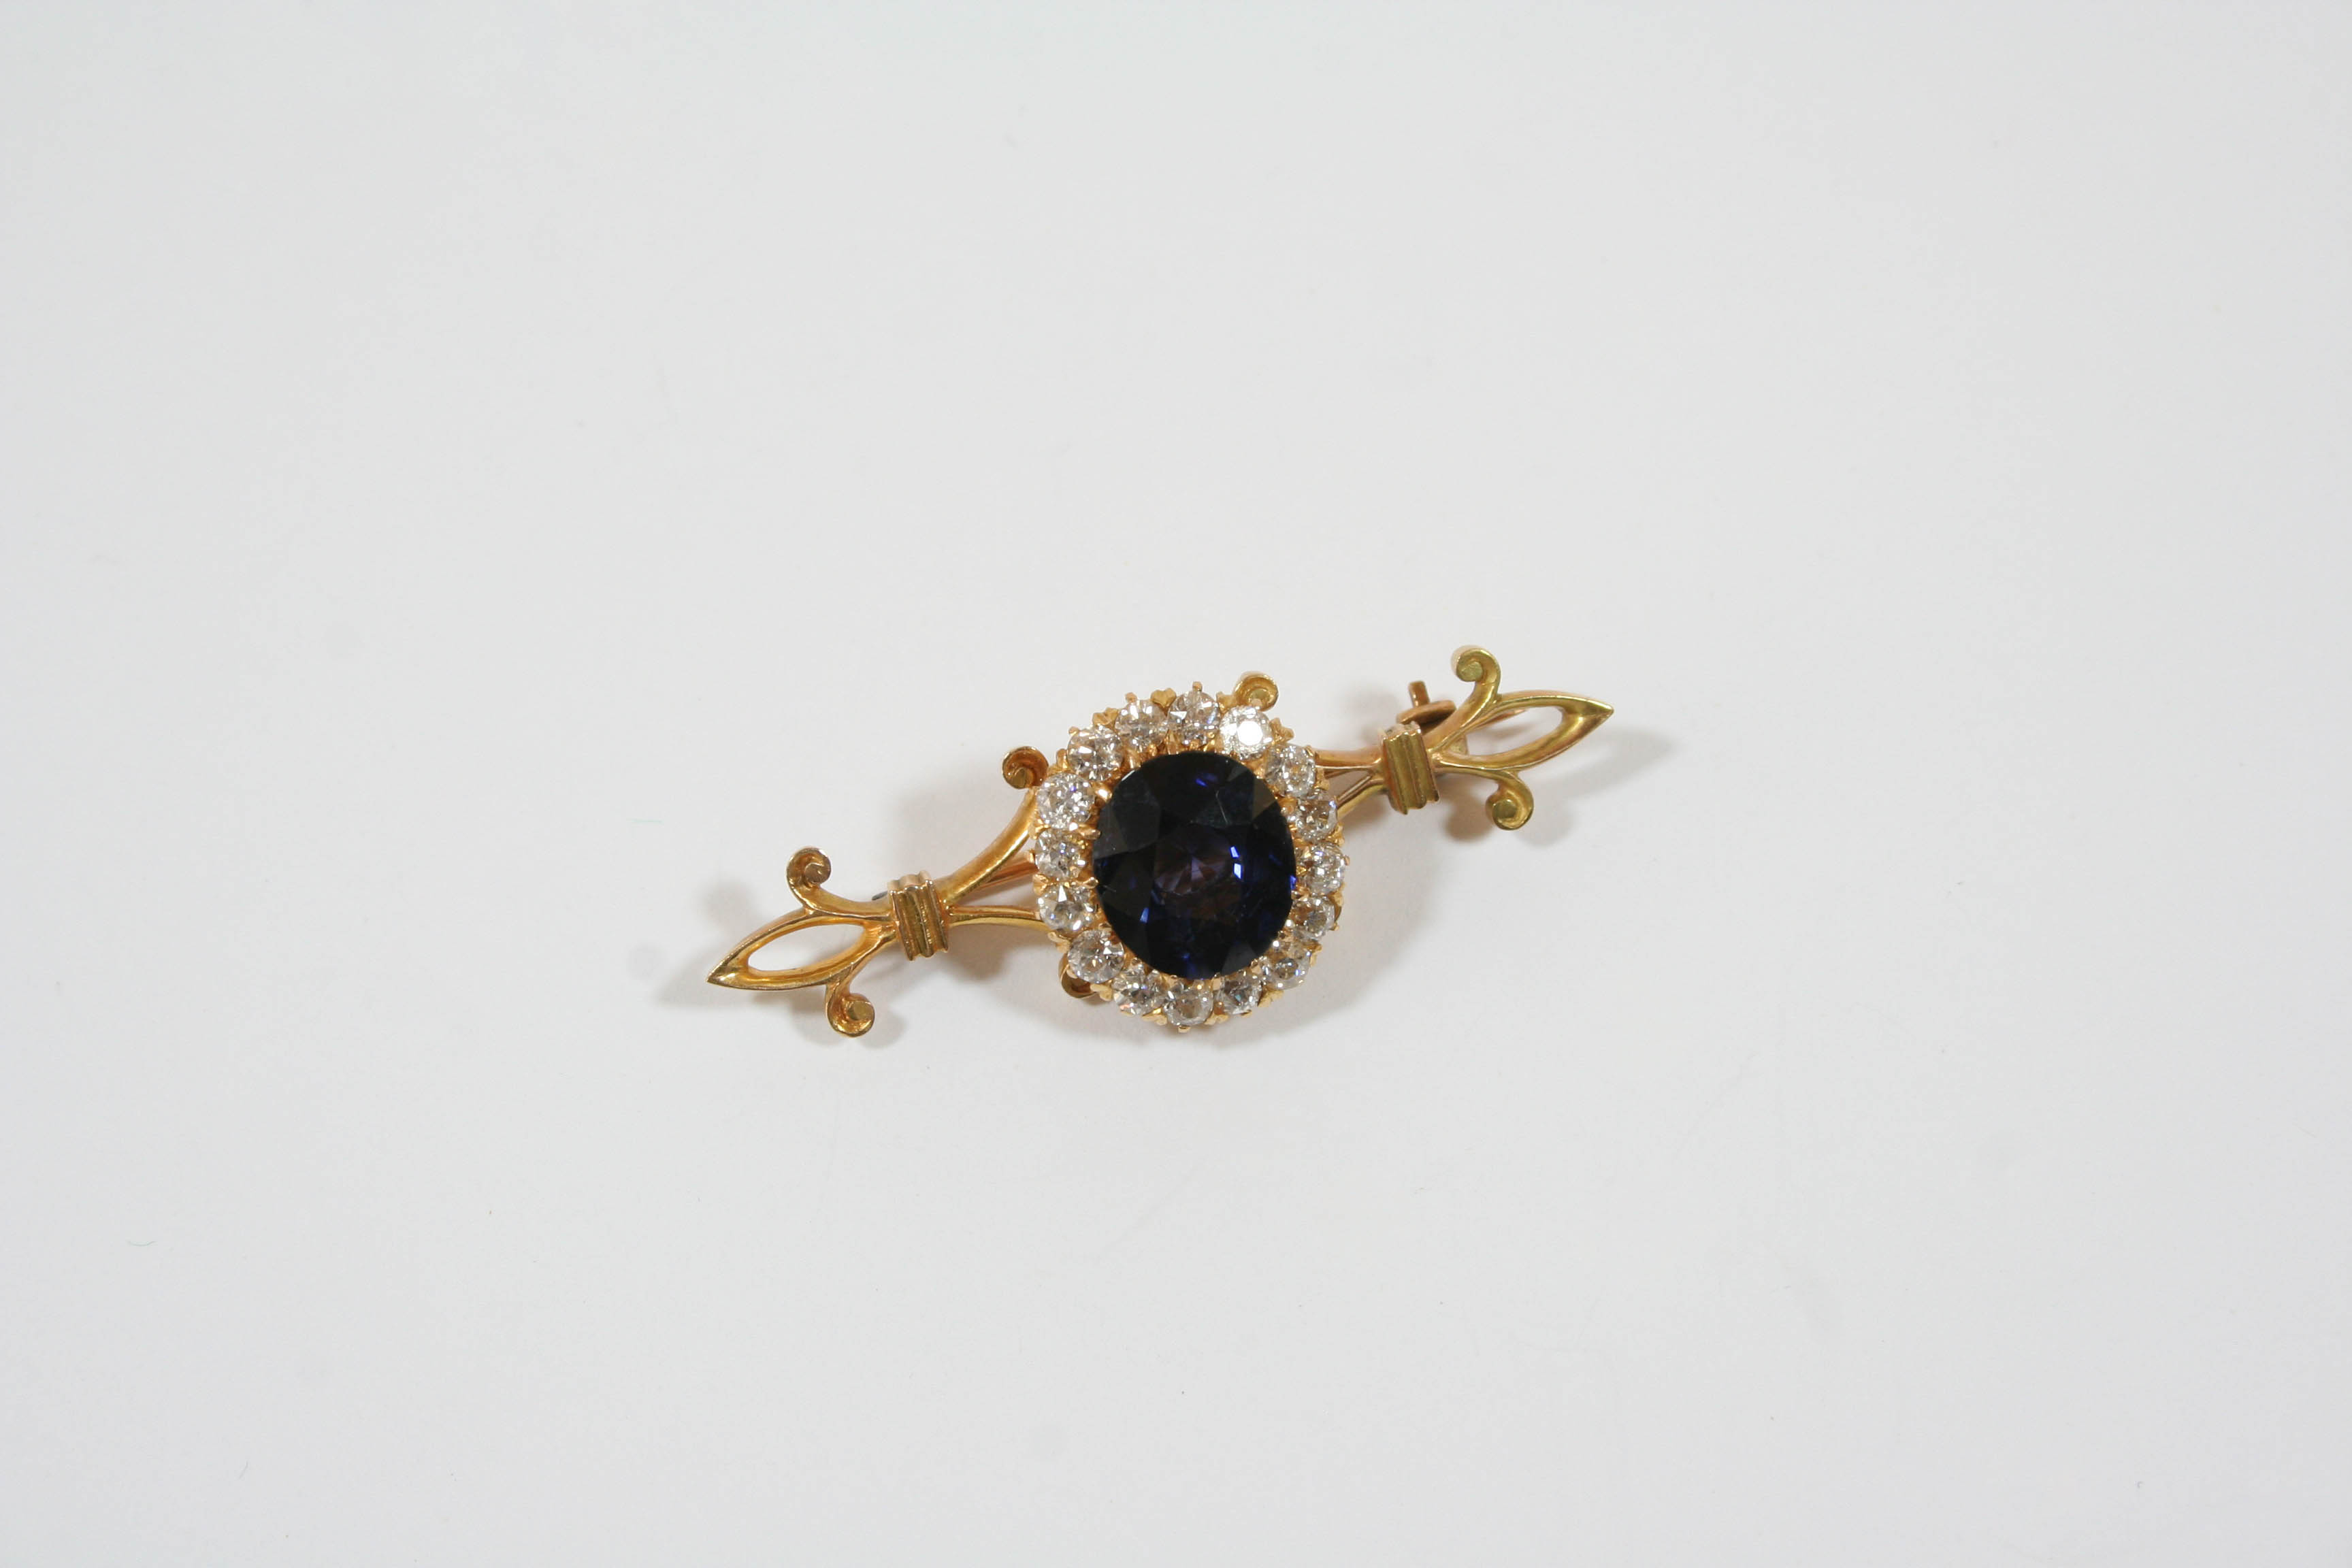 A SAPPHIRE AND DIAMOND CLUSTER BROOCH the oval-shaped sapphire is set within a surround of